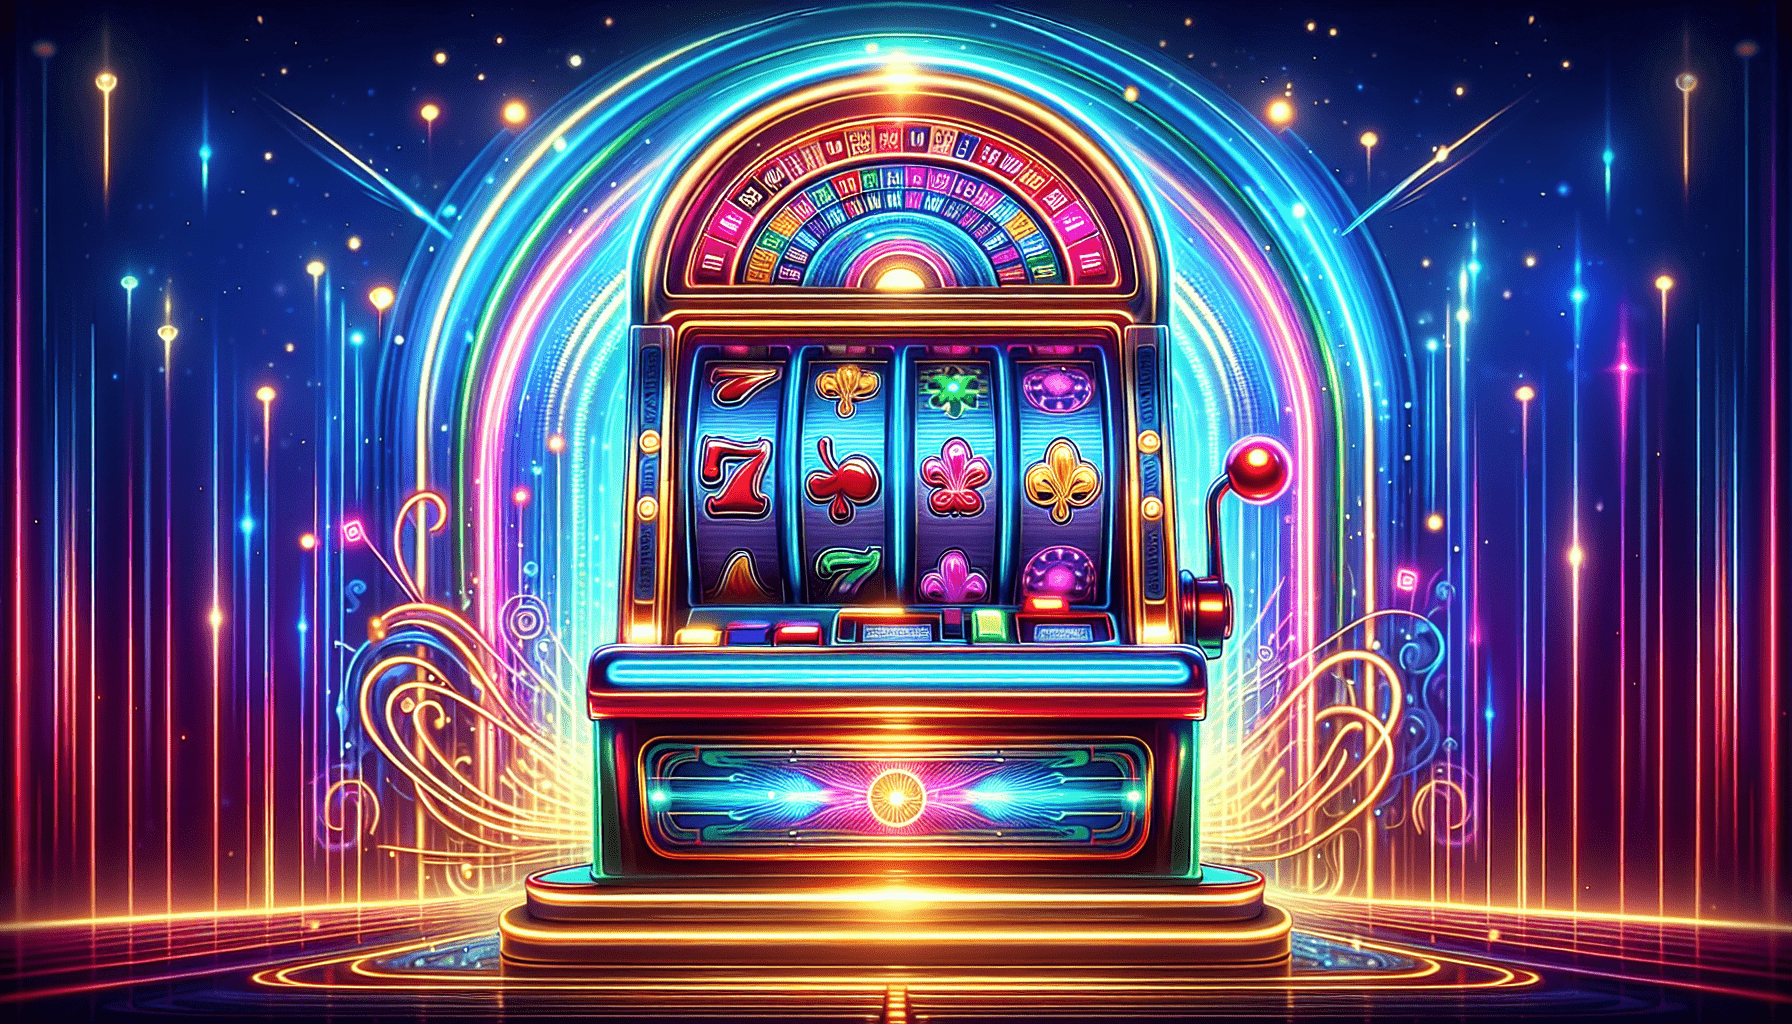 Can You Really Win Money With Online Slots?